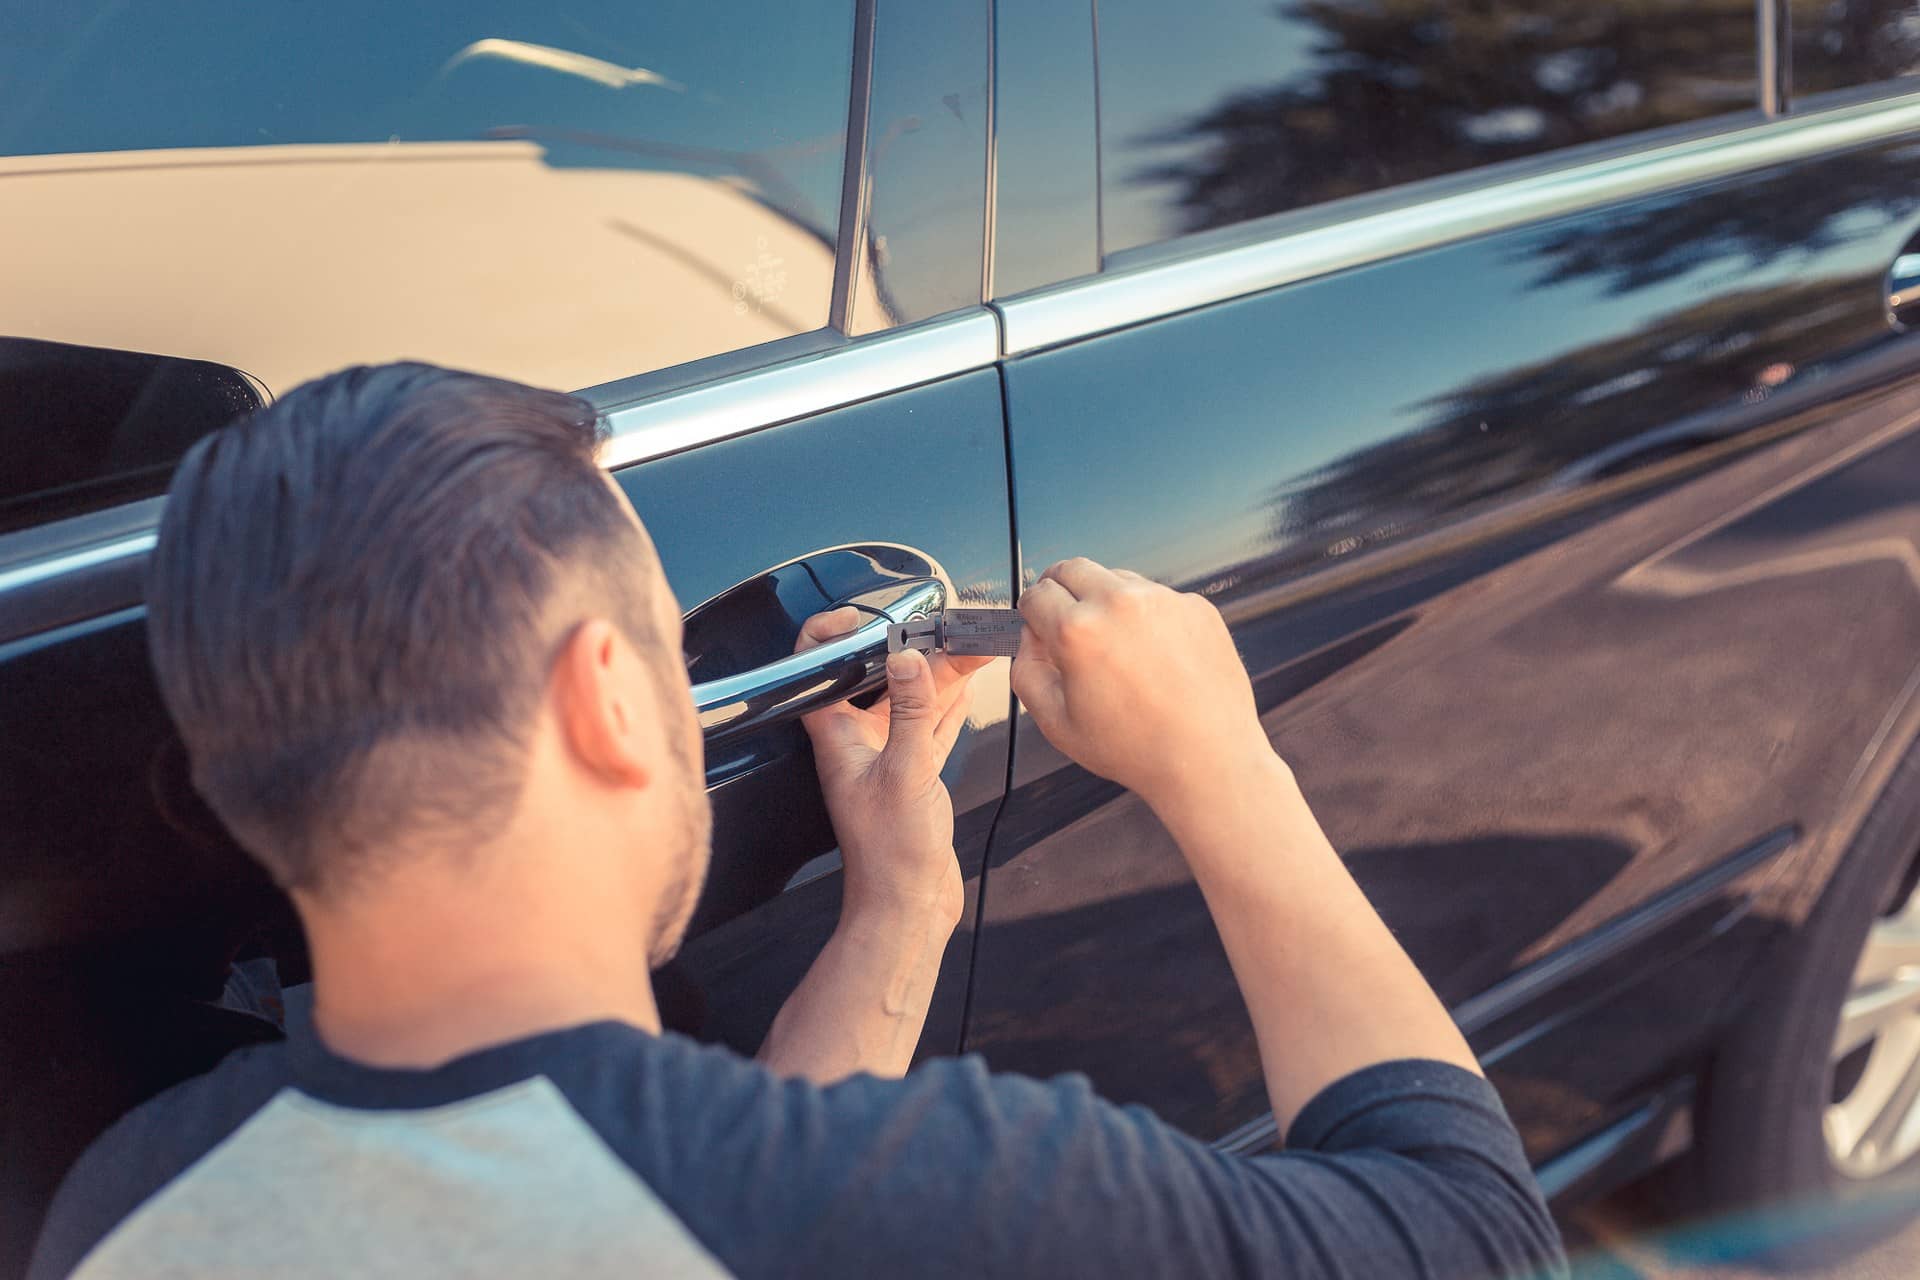 Car Key Replacement Near Me Cheap - The High Cost Of Car Key